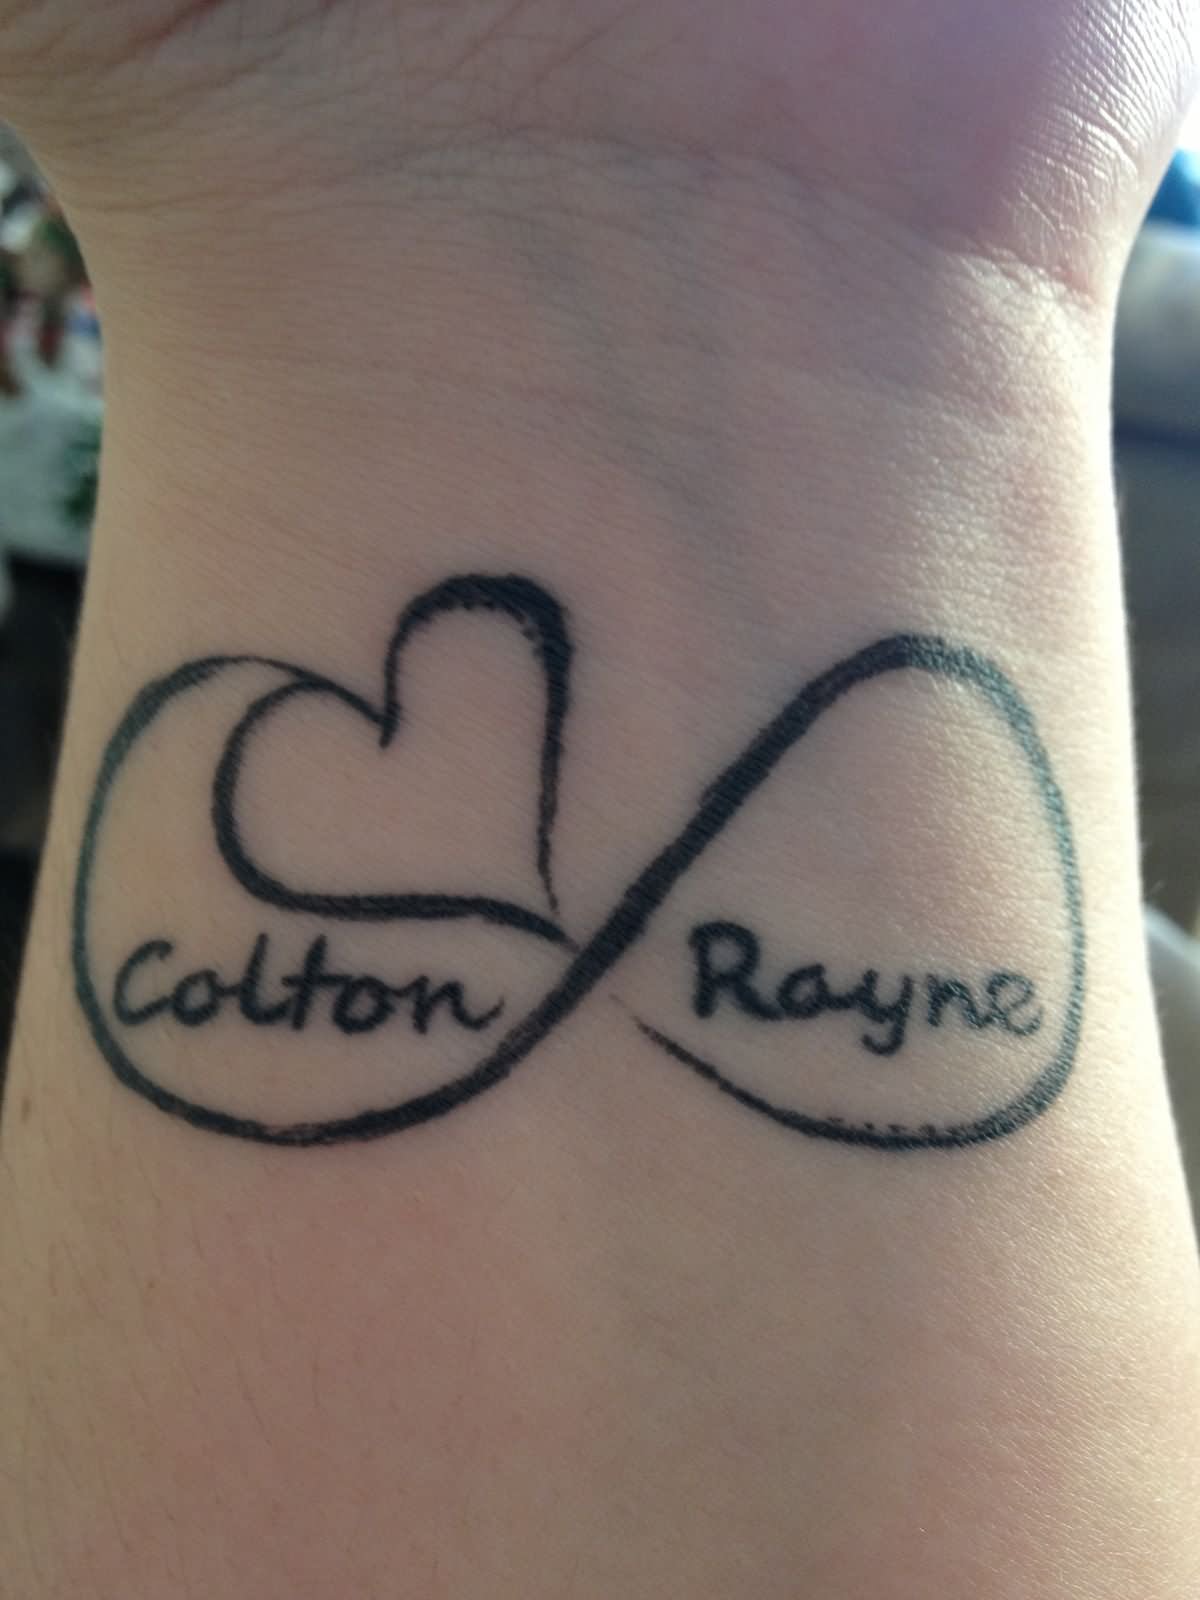 Colton Rayne Name With Infinity And Heart Tattoo On Wrist